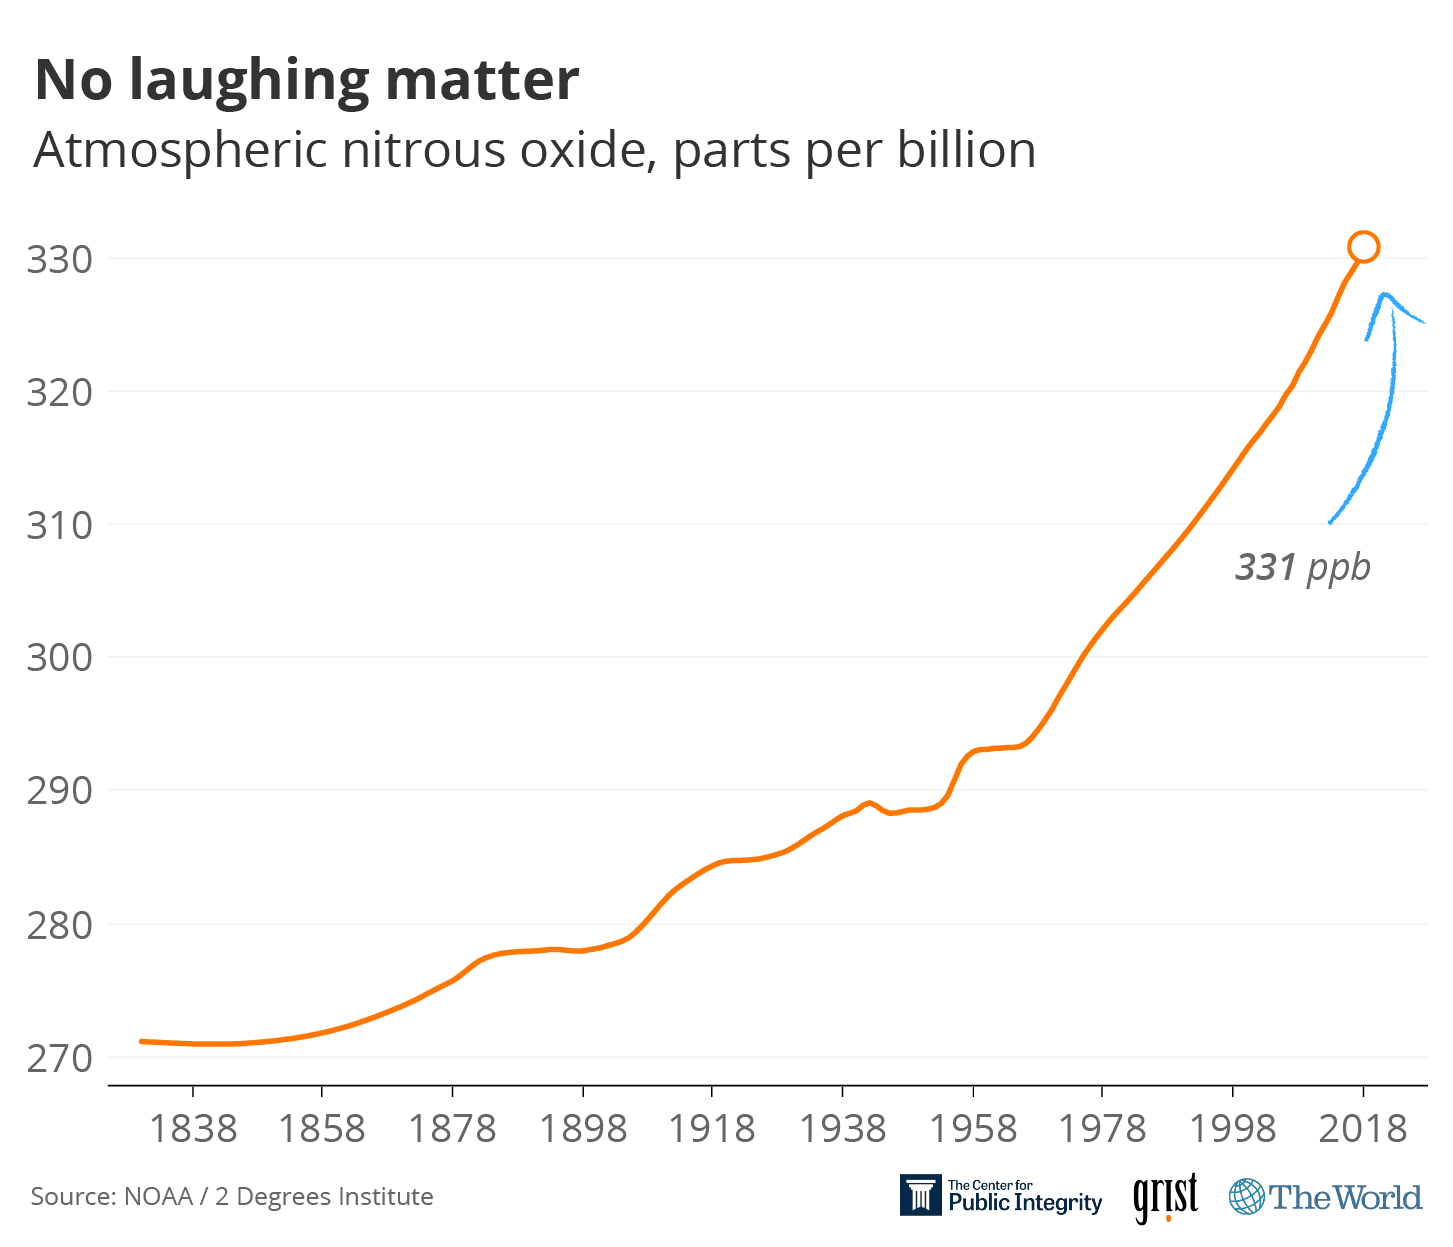 A graphic showing the atmospheric nitrous oxide, parts per billion steadily moving up for more than 100 years.